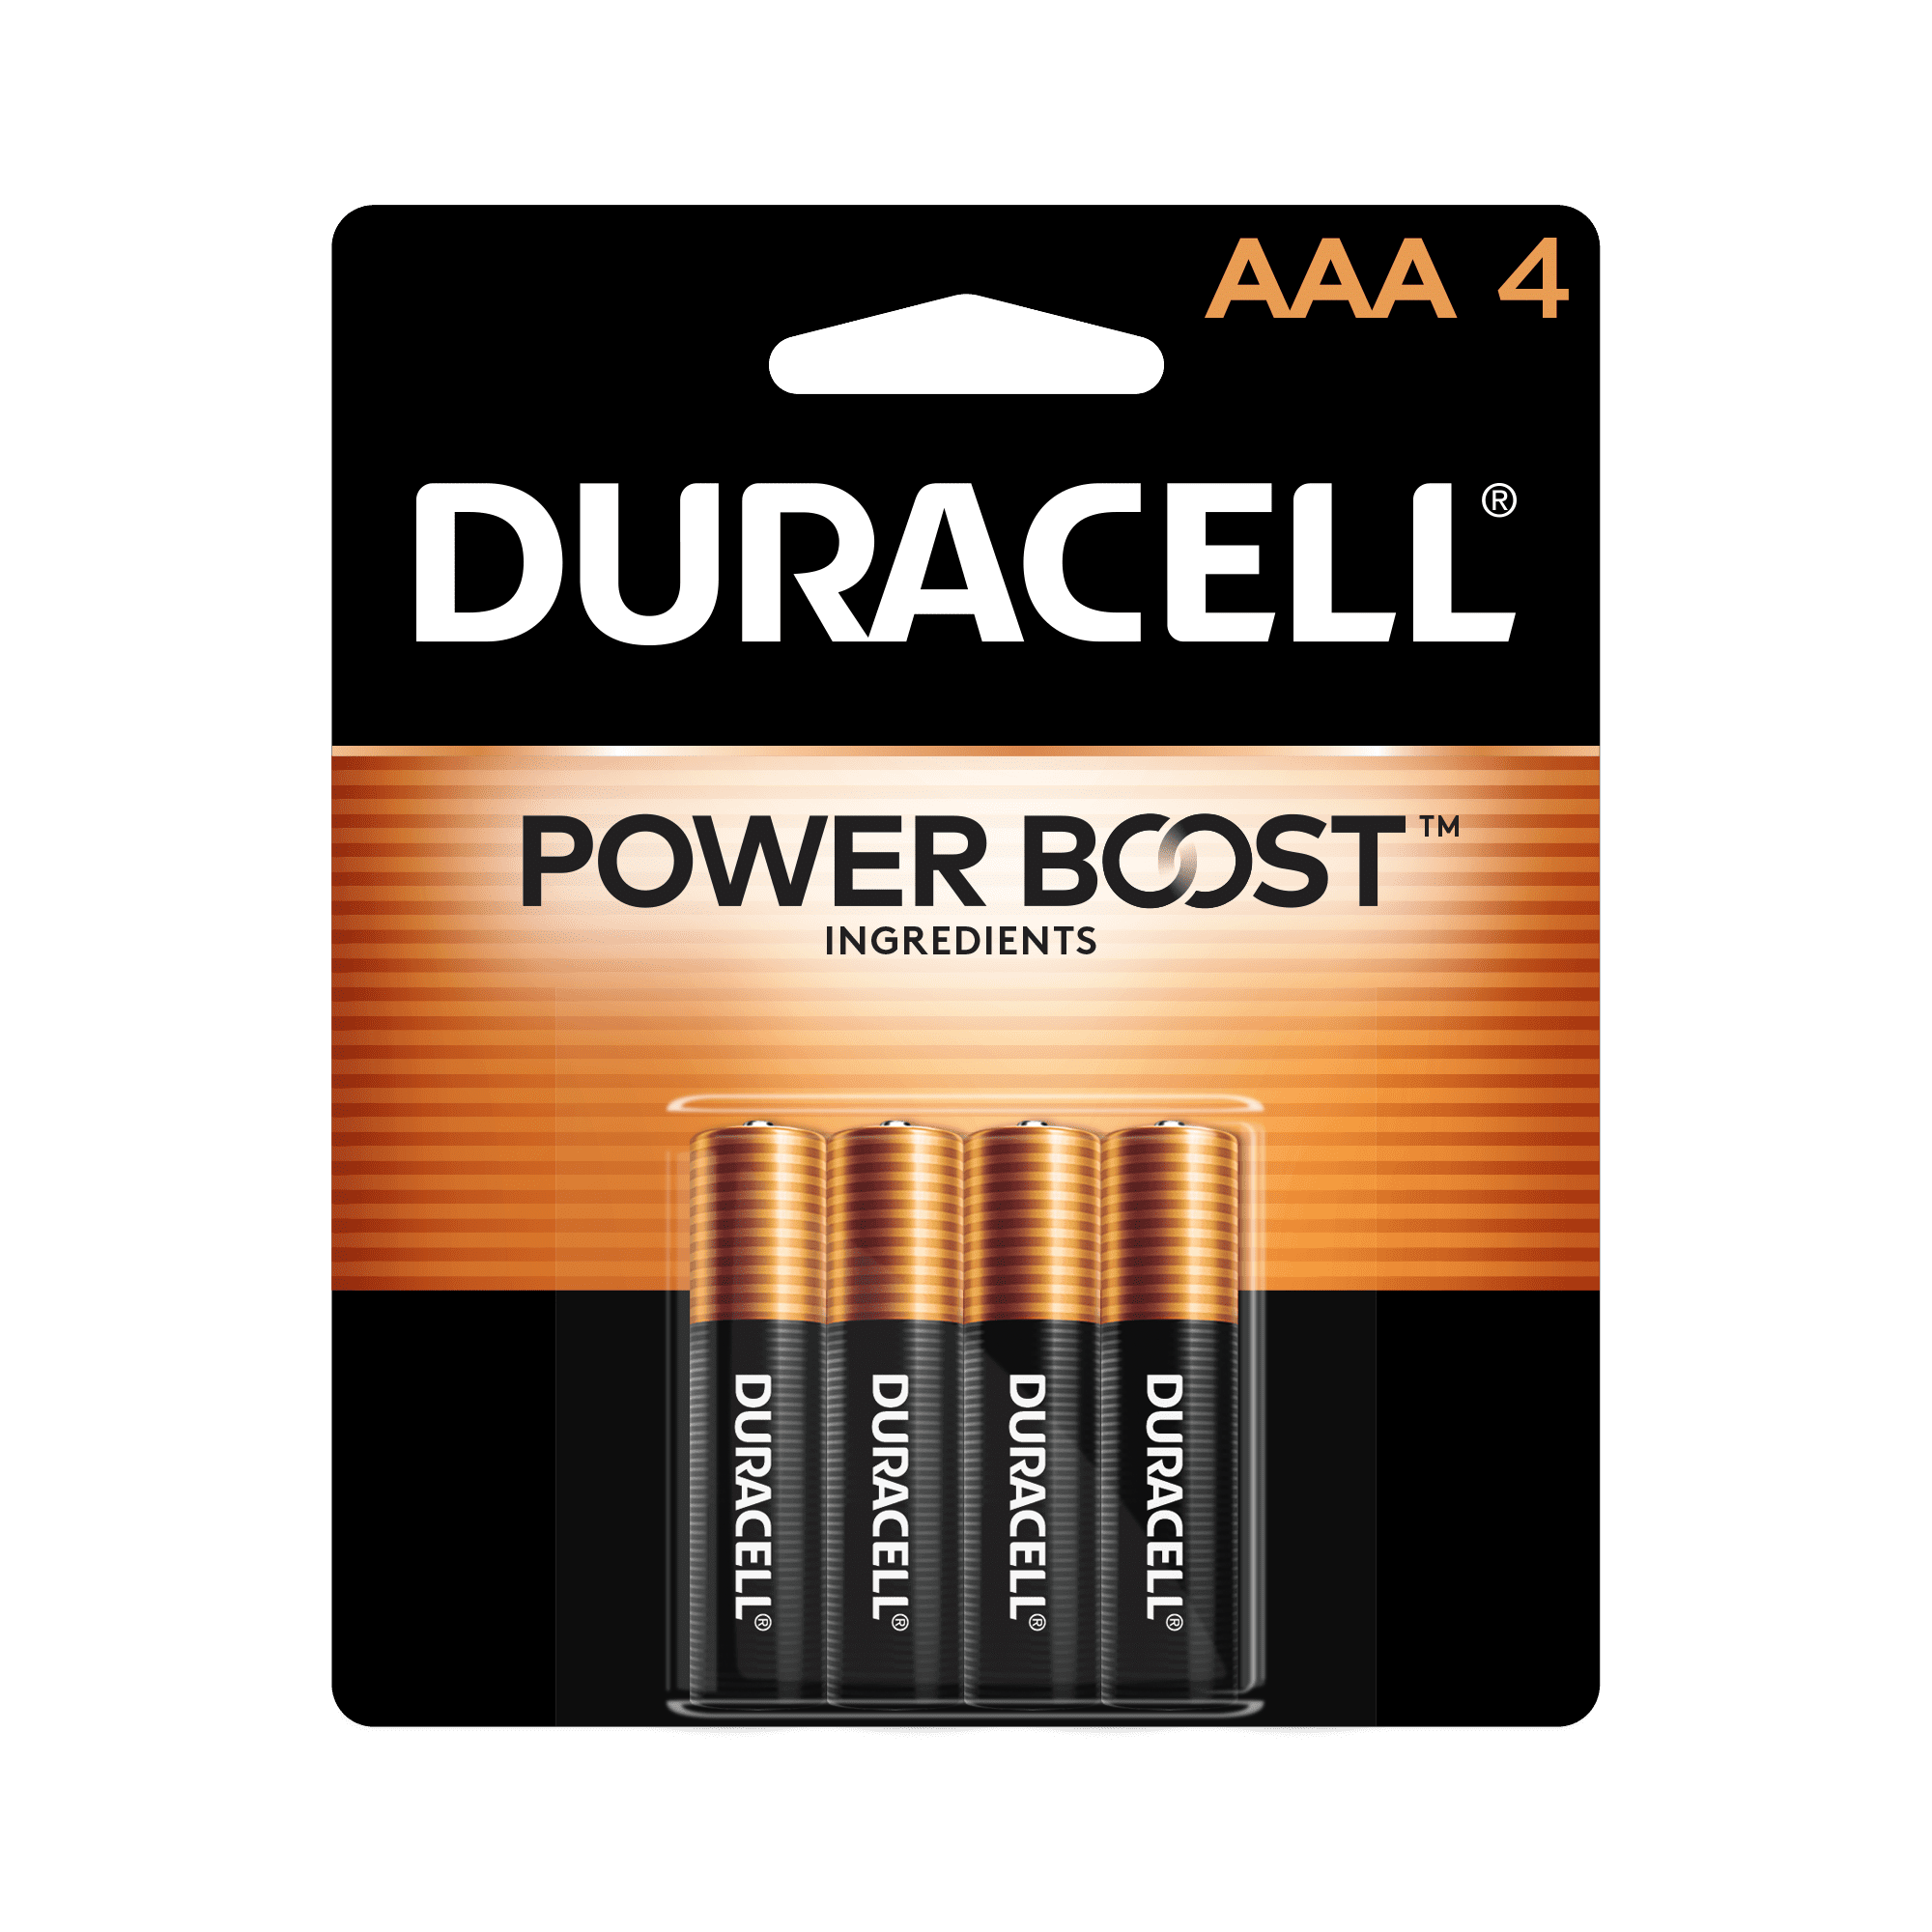 Duracell Coppertop AAA Battery with POWER BOOST, 4 Pack Long-Lasting Batteries